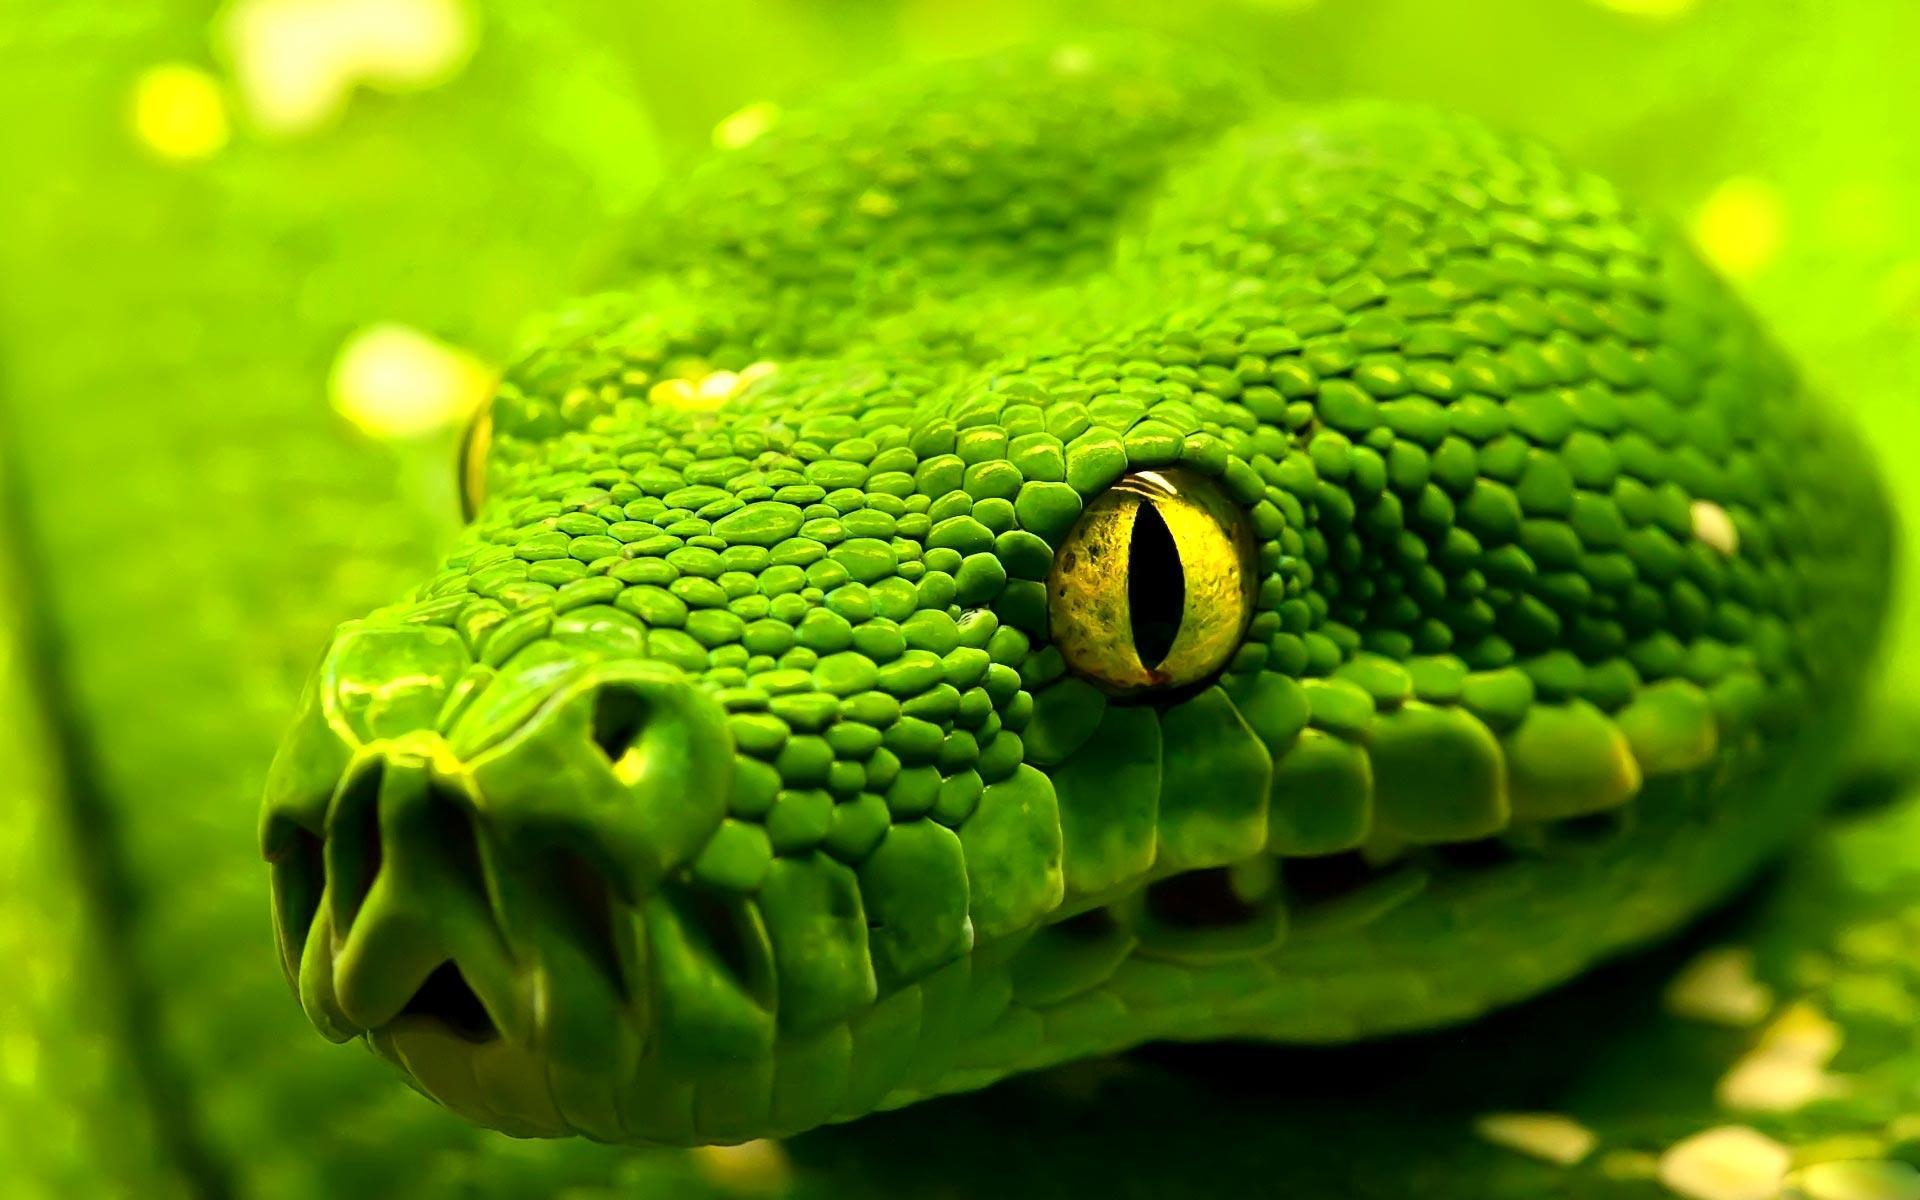 HD Wallpaper of Snakes Pythons